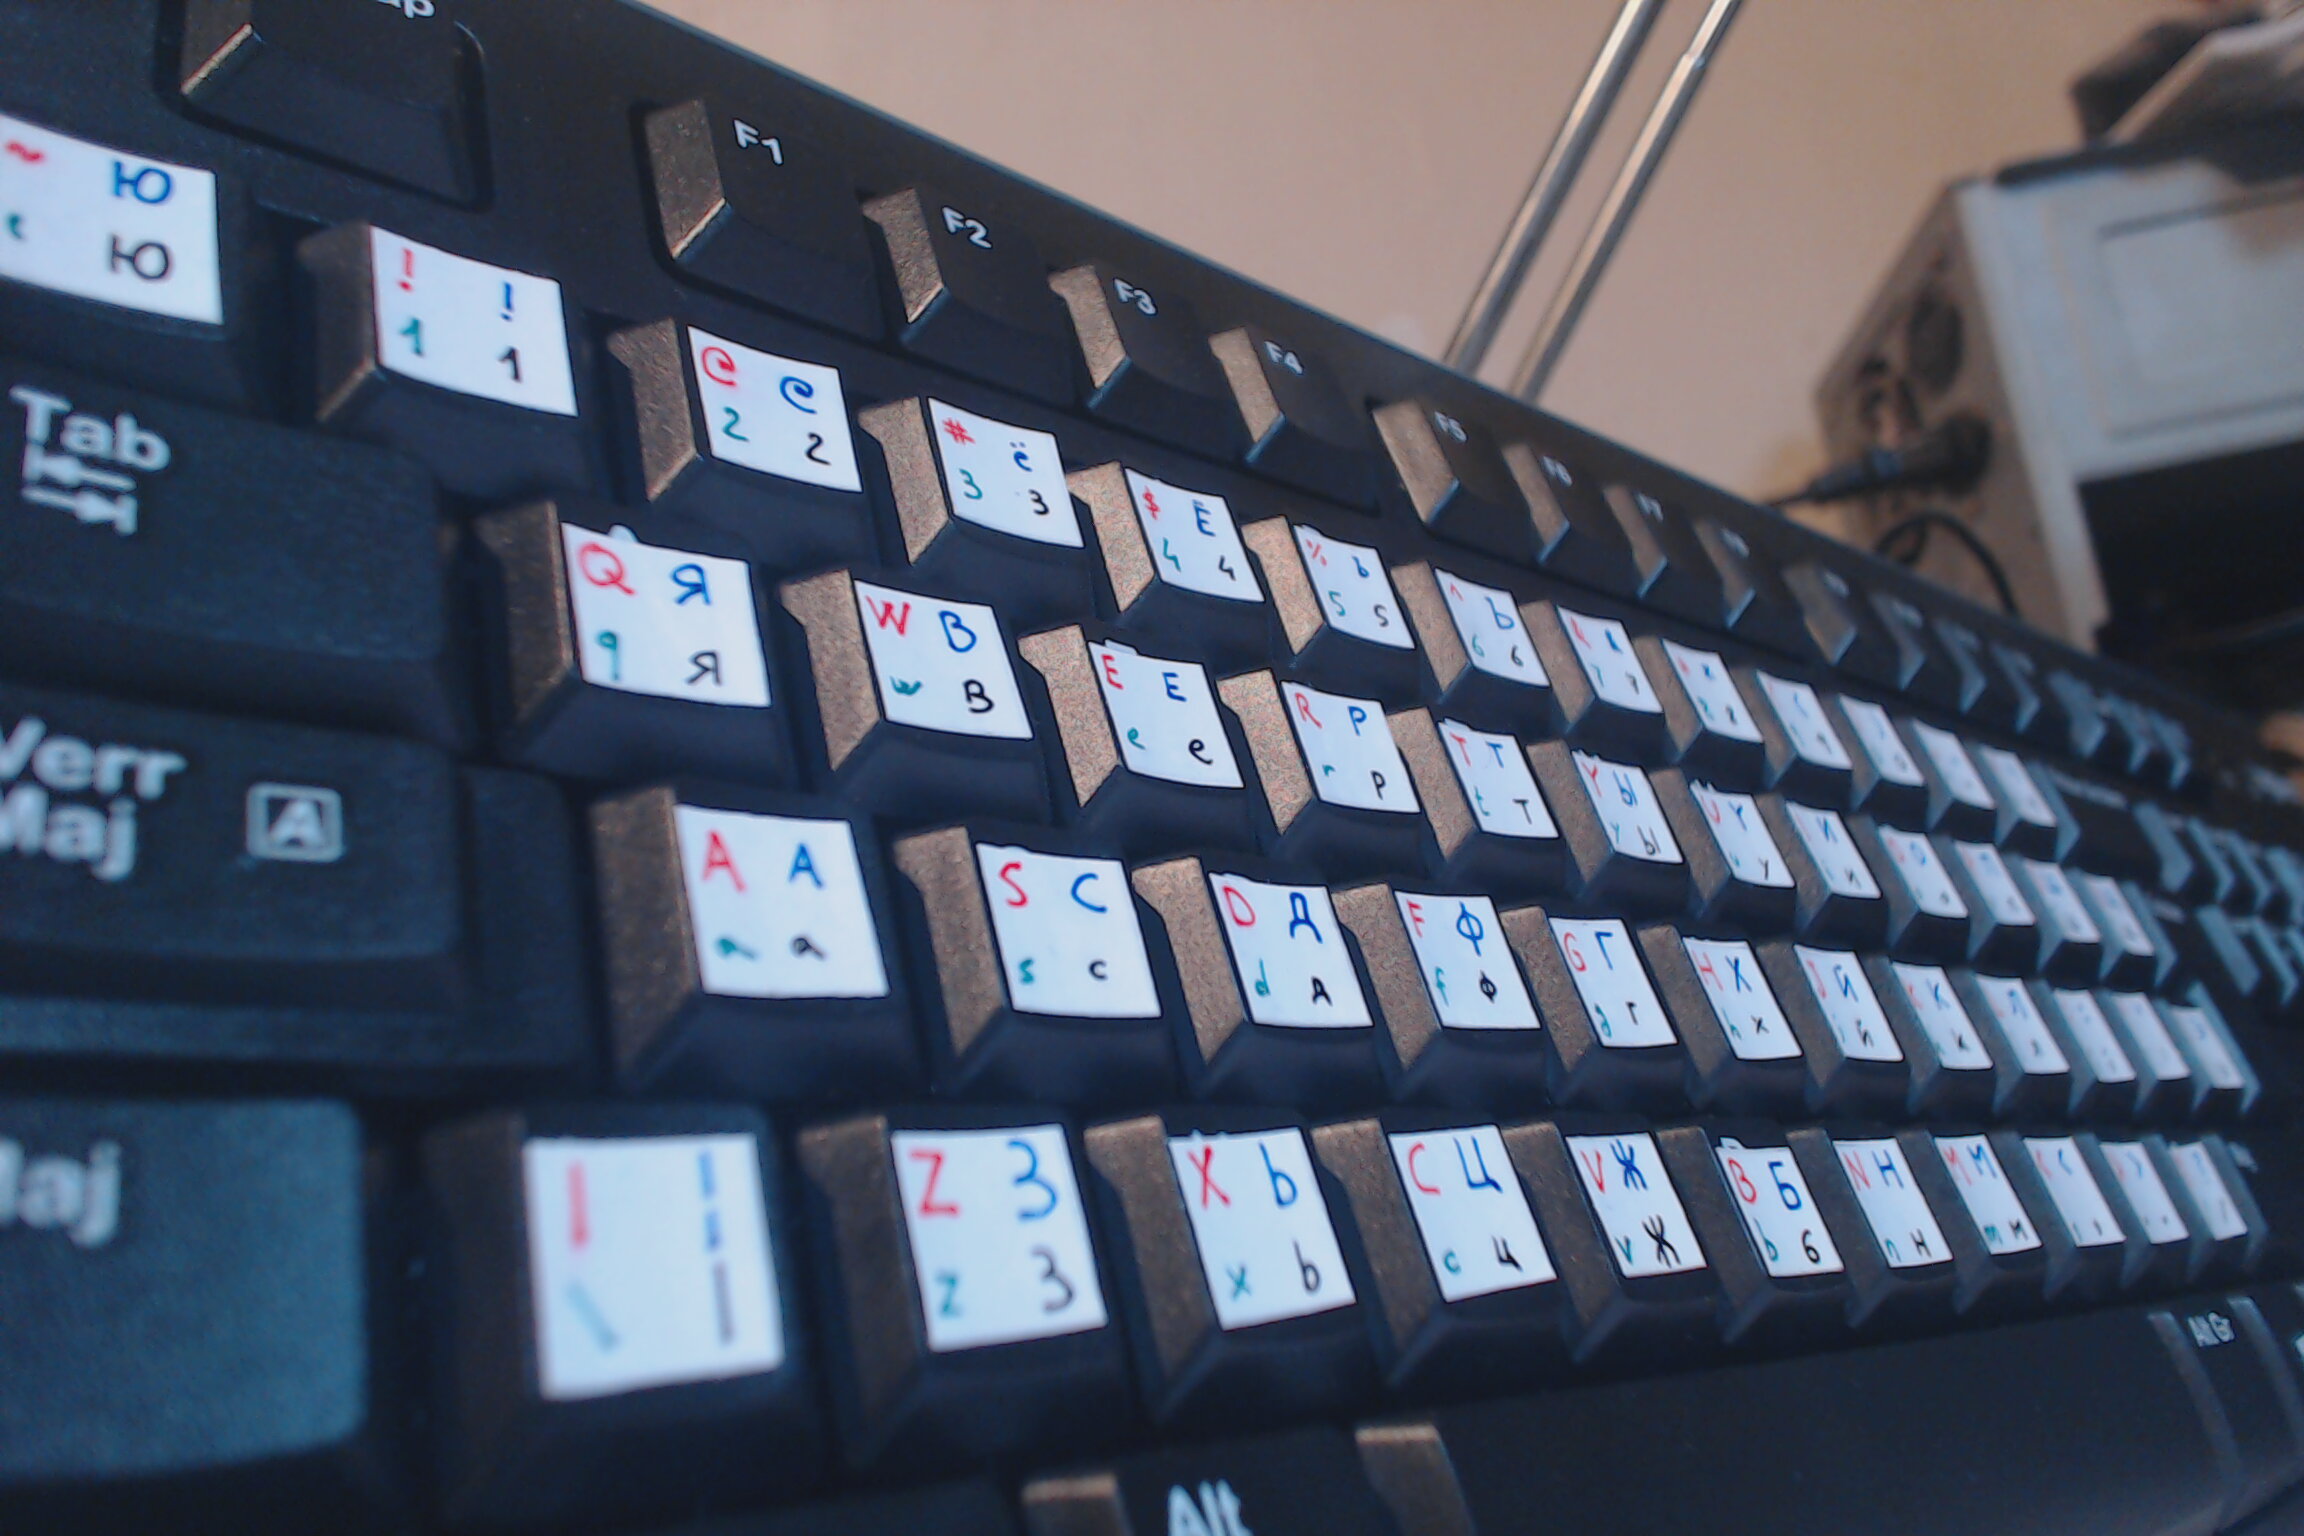 My hand-made Russian (phonetic) keyboards, image 13 of 14